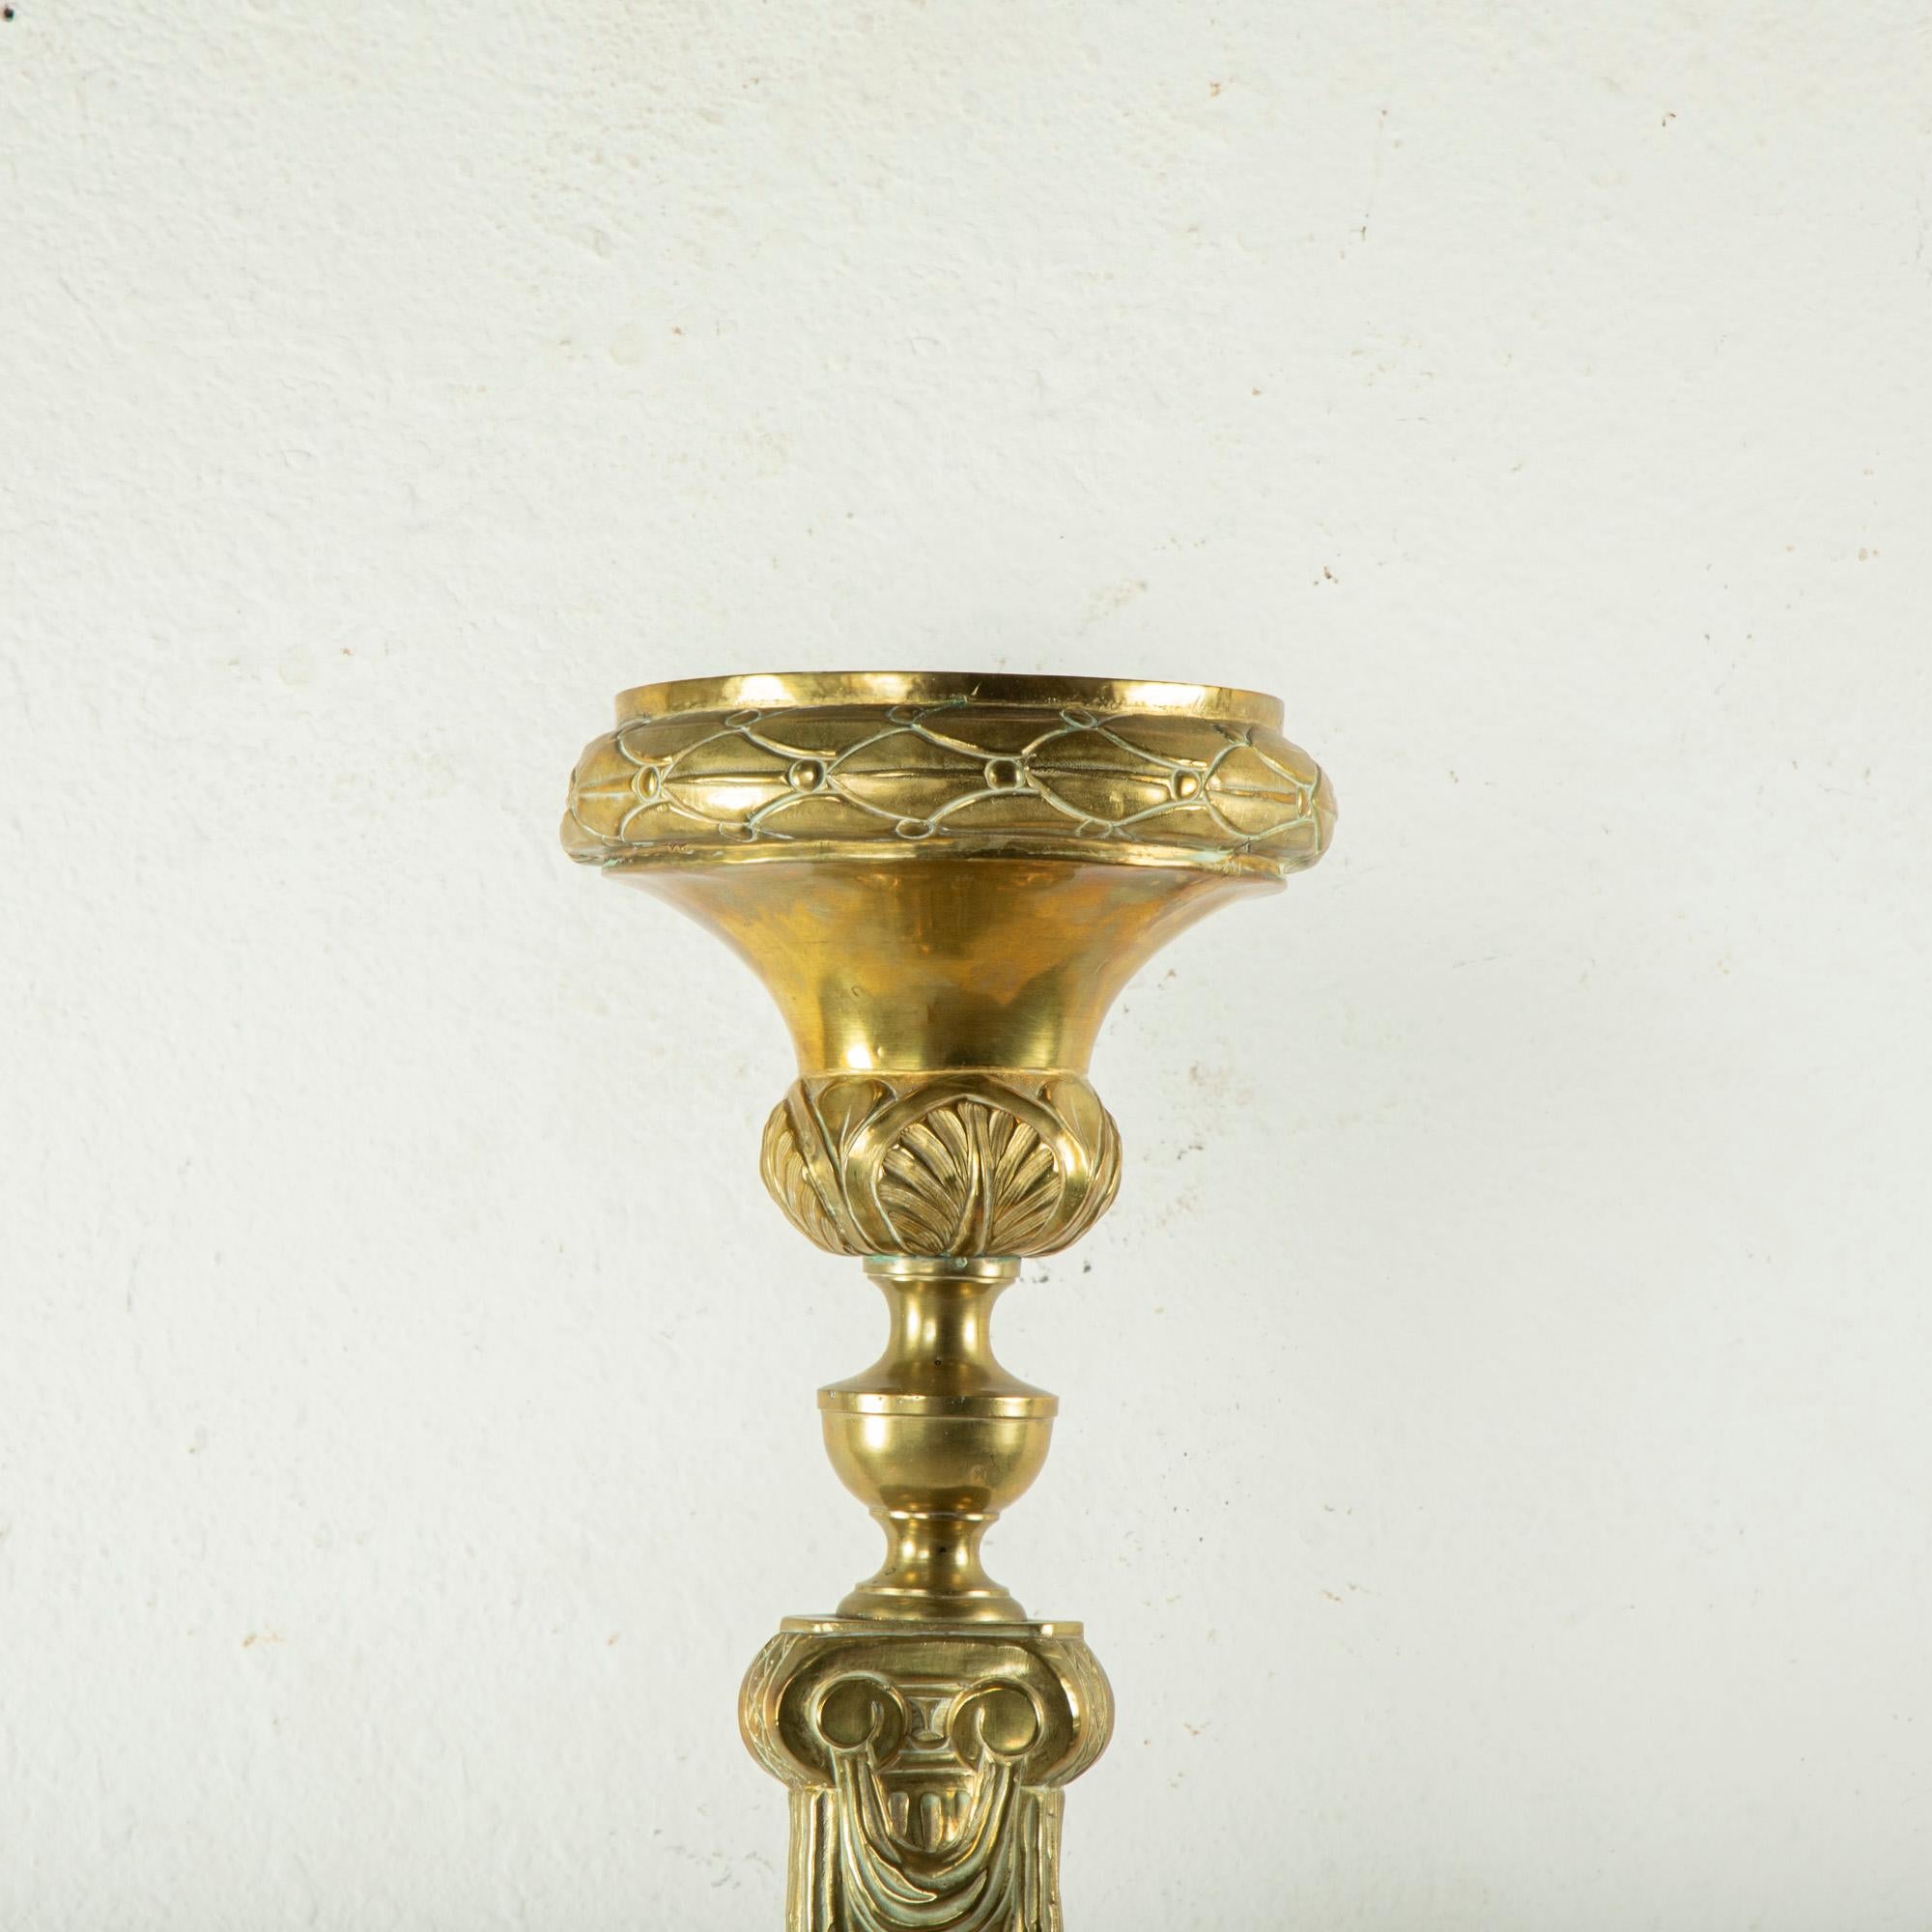 Repoussé Tall Late 19th Century Brass Repousse Church Pricket, Candlestick For Sale